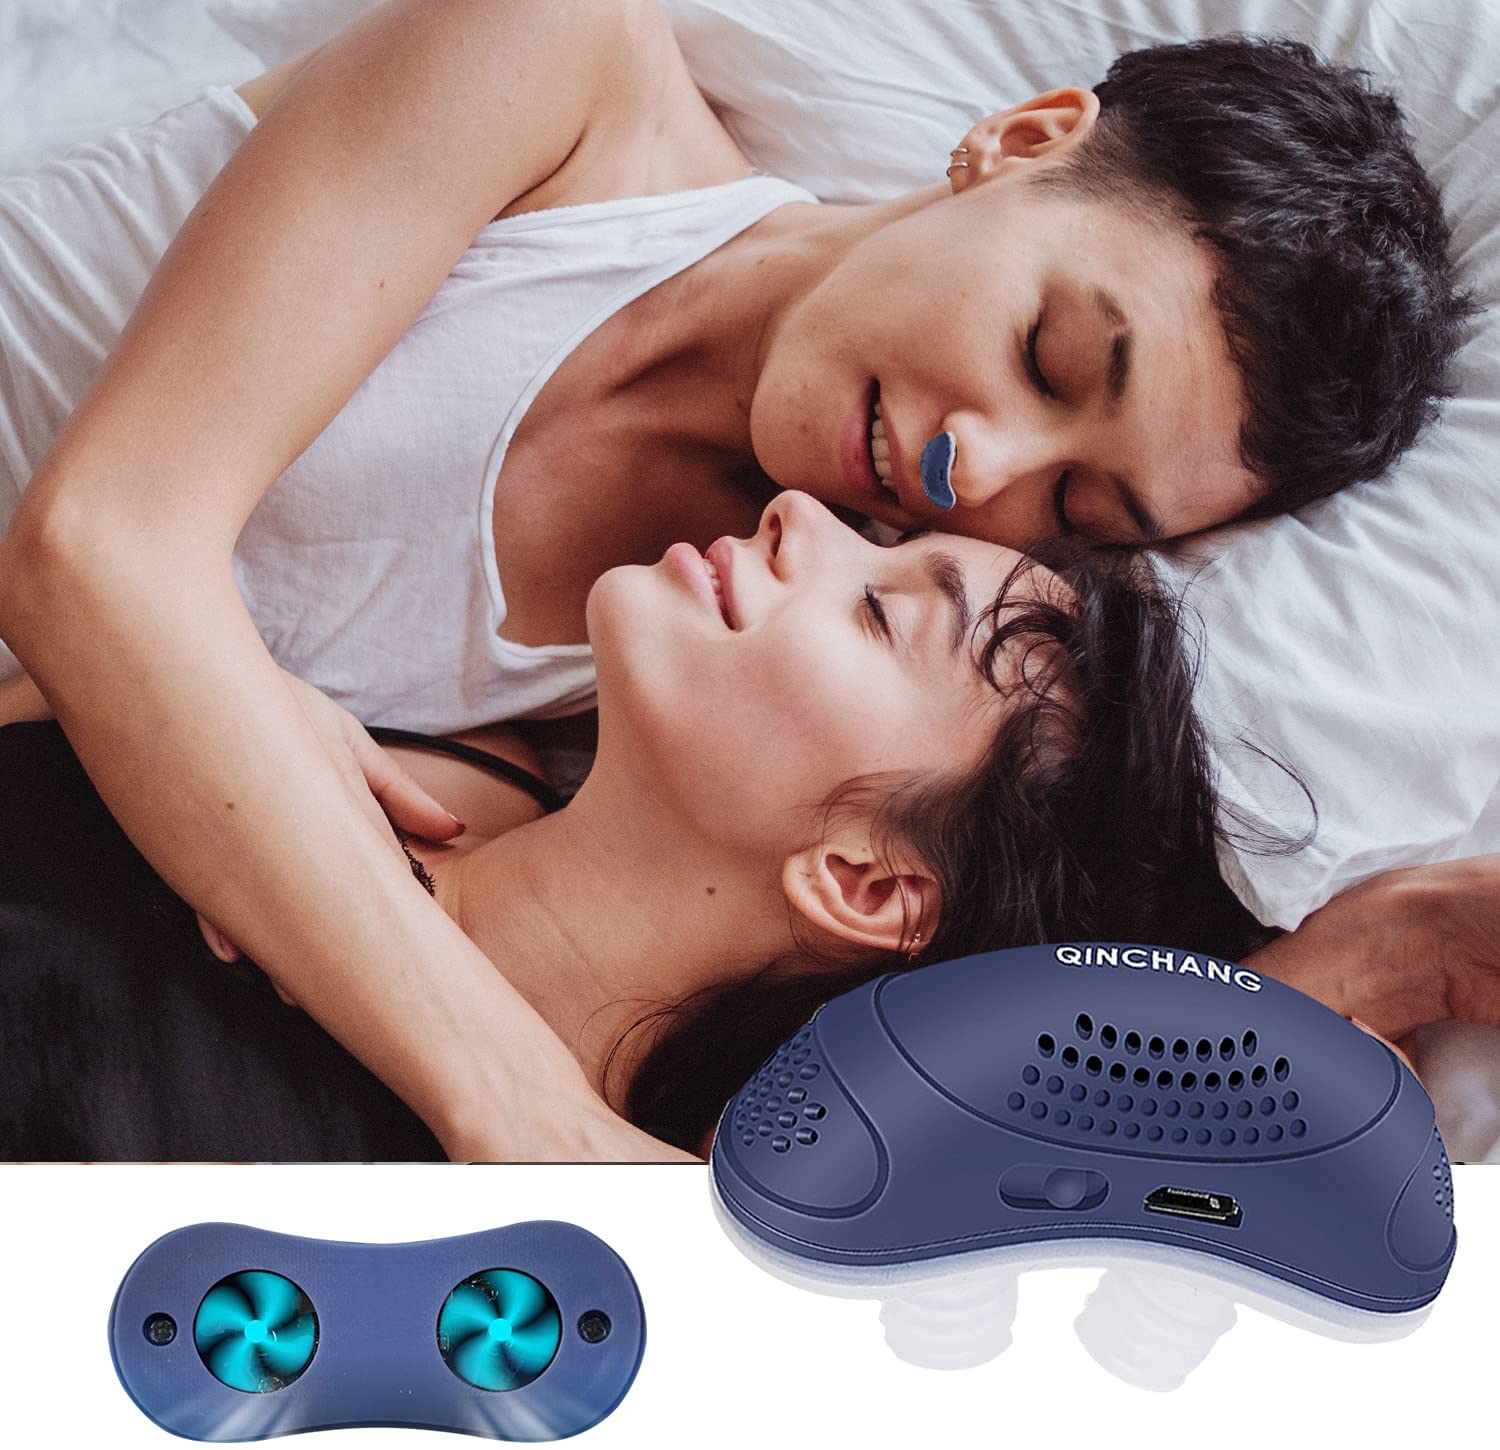 Airing: The first hoseless, maskless, micro-CPAP Anti Snoring